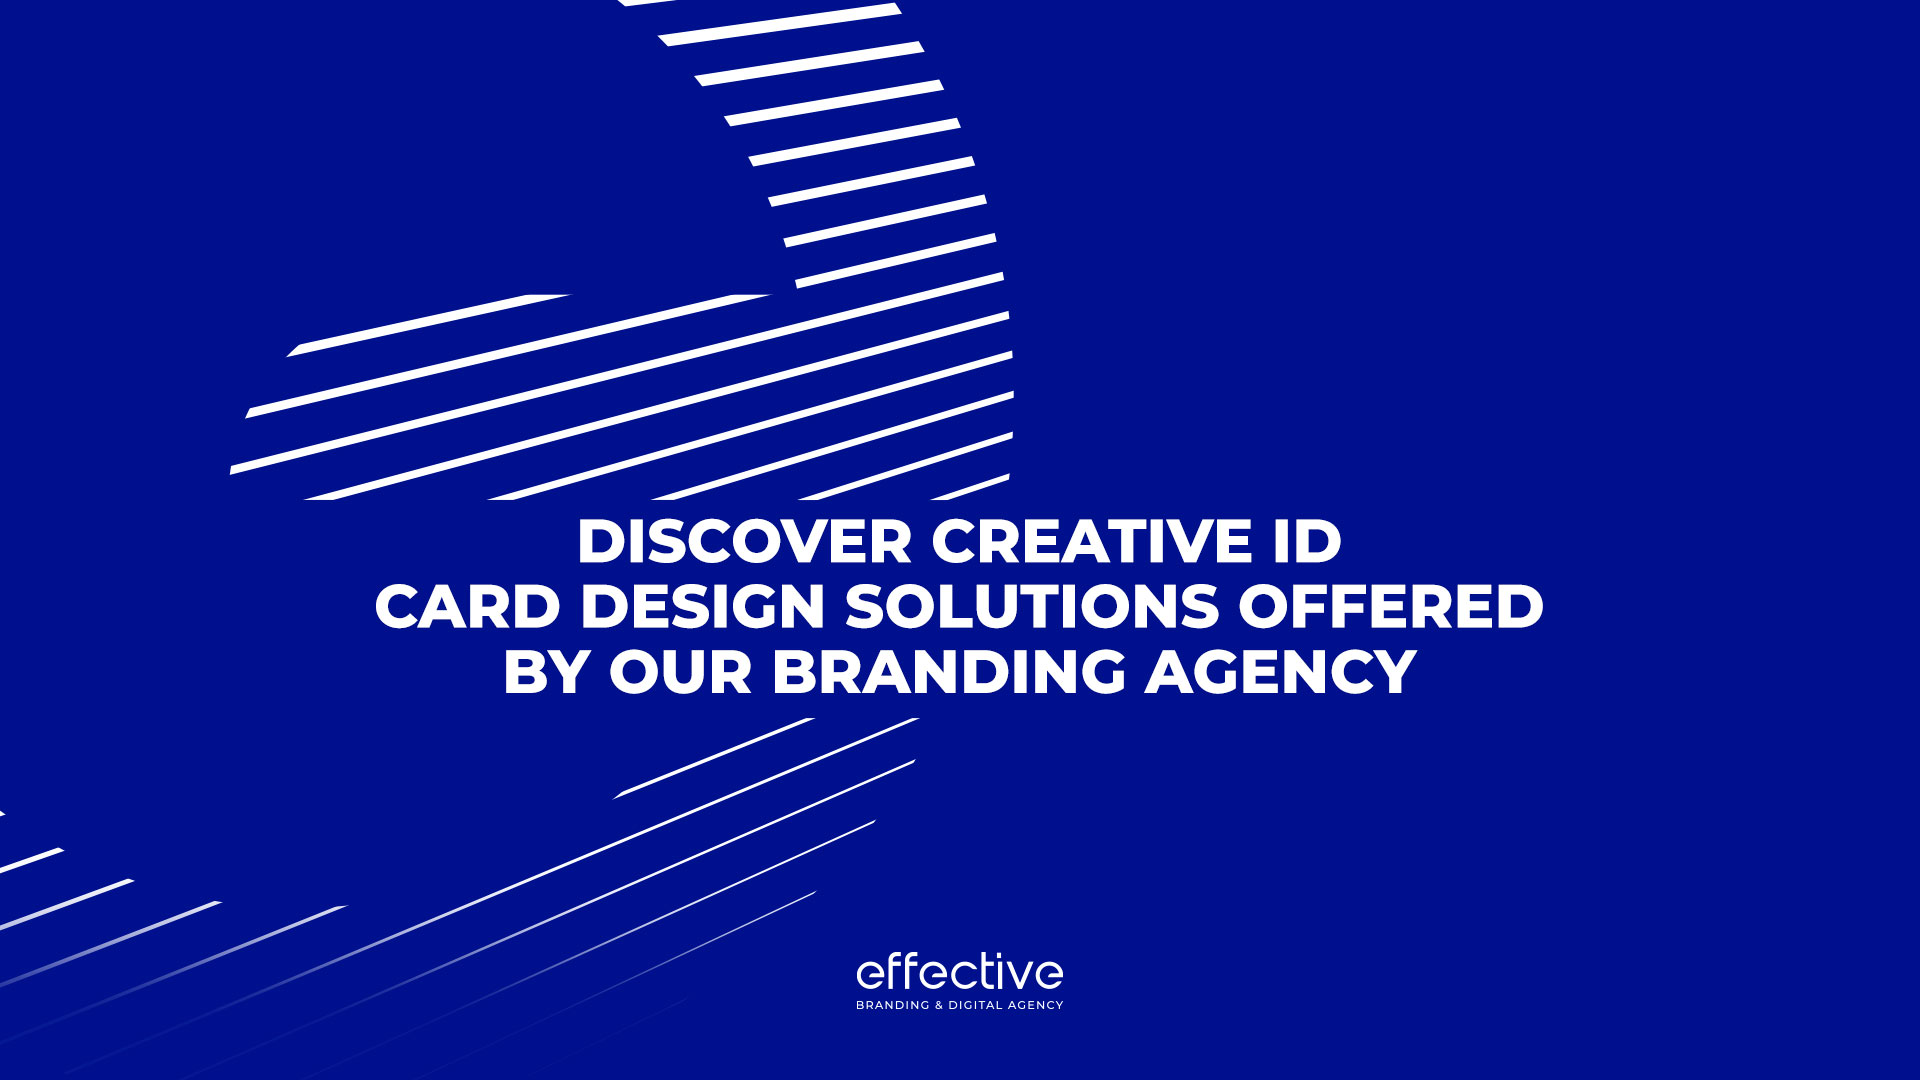 Discover Creative ID Card Design Solutions Offered by Our Branding Agency